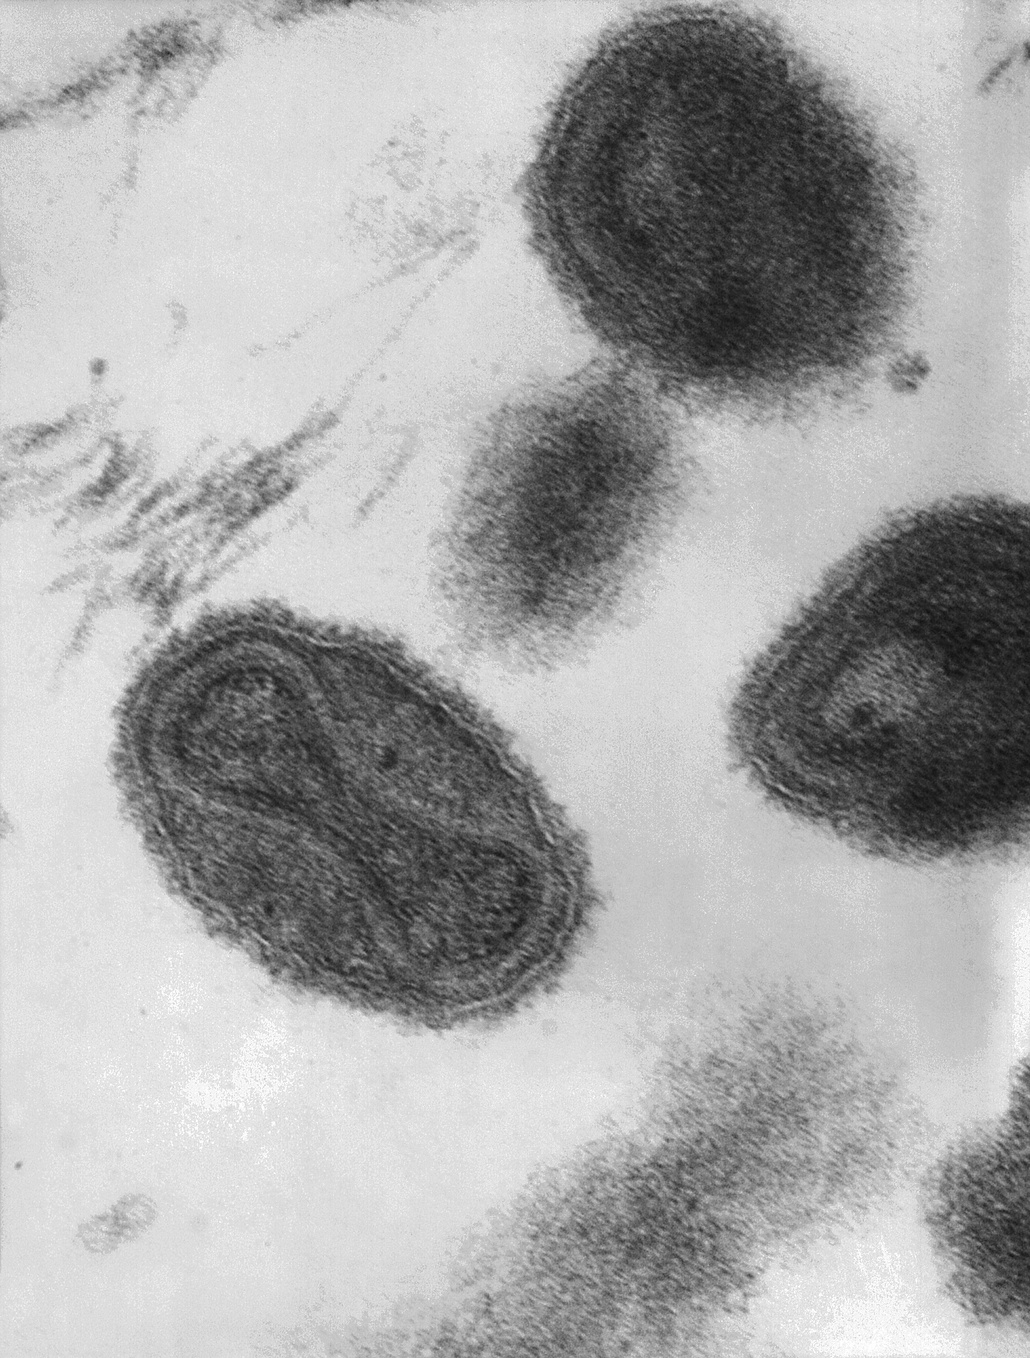 The dumbbell-shaped structure inside smallpox contains viral DNA. Image: Centres for Disease Control and Prevention's Public Health Image Library